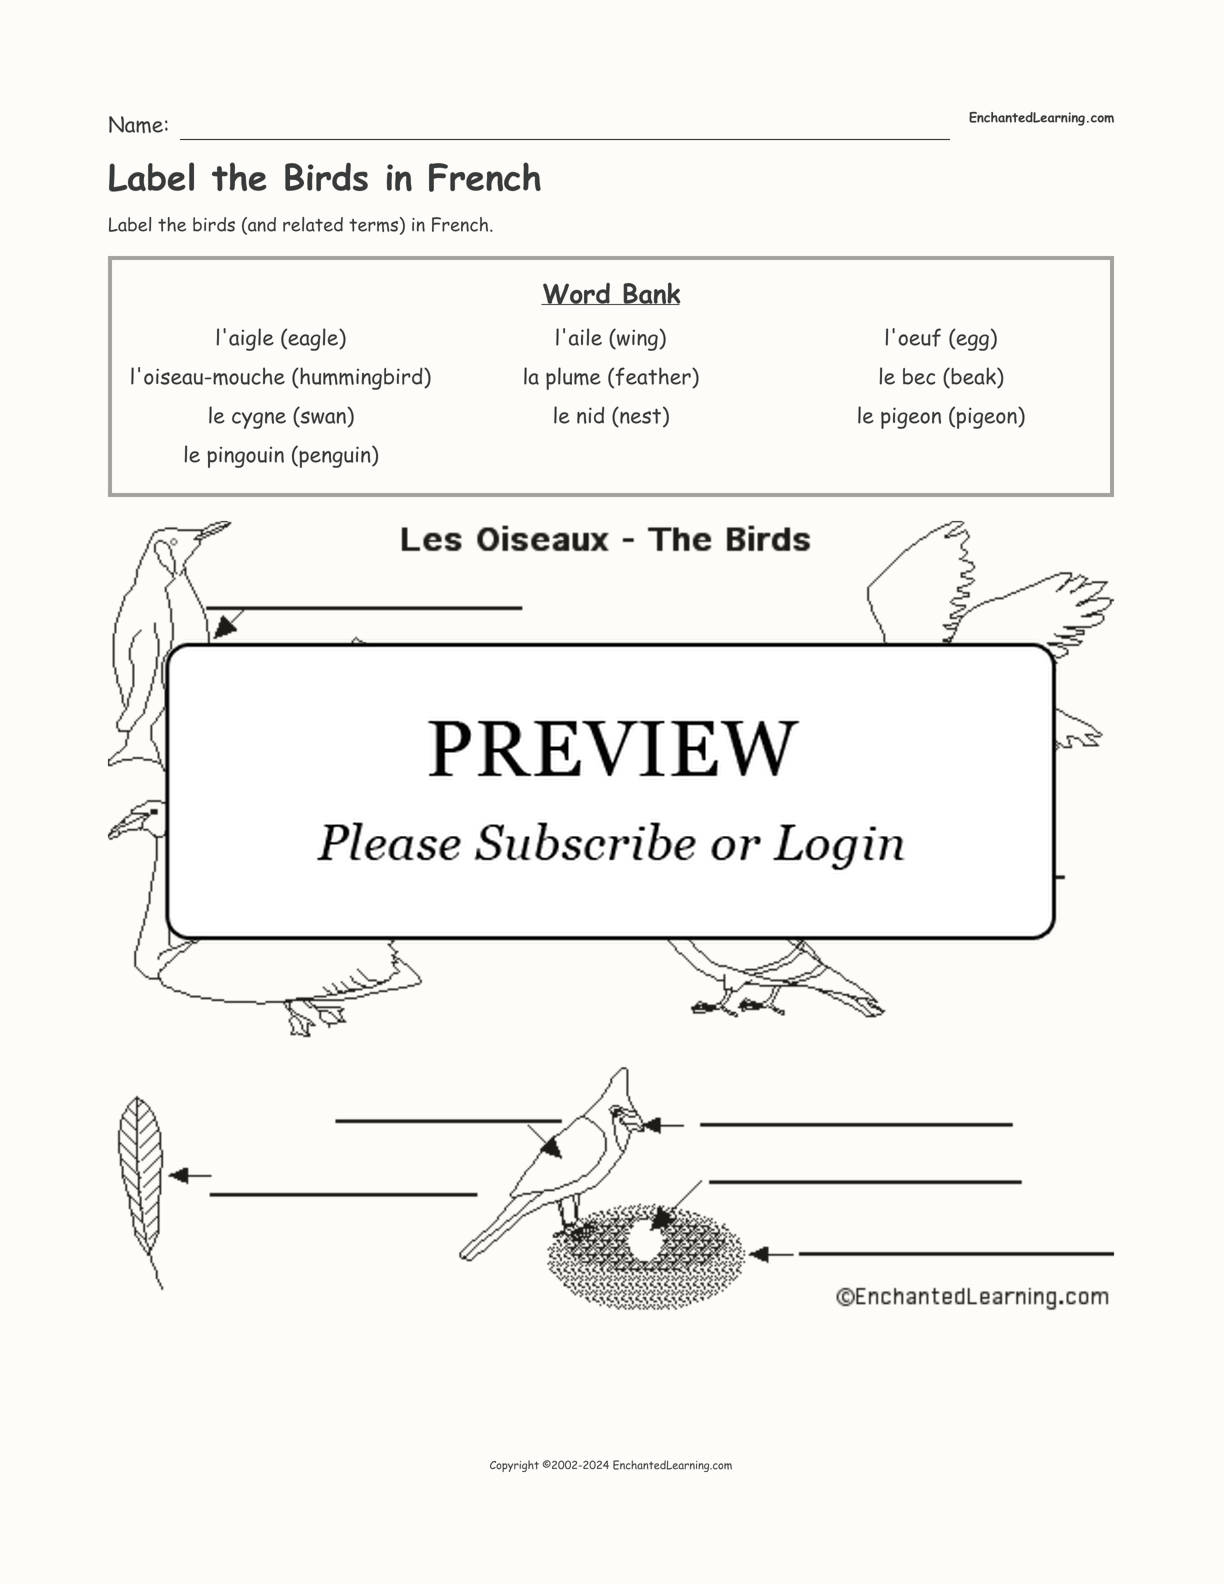 Label the Birds in French interactive worksheet page 1